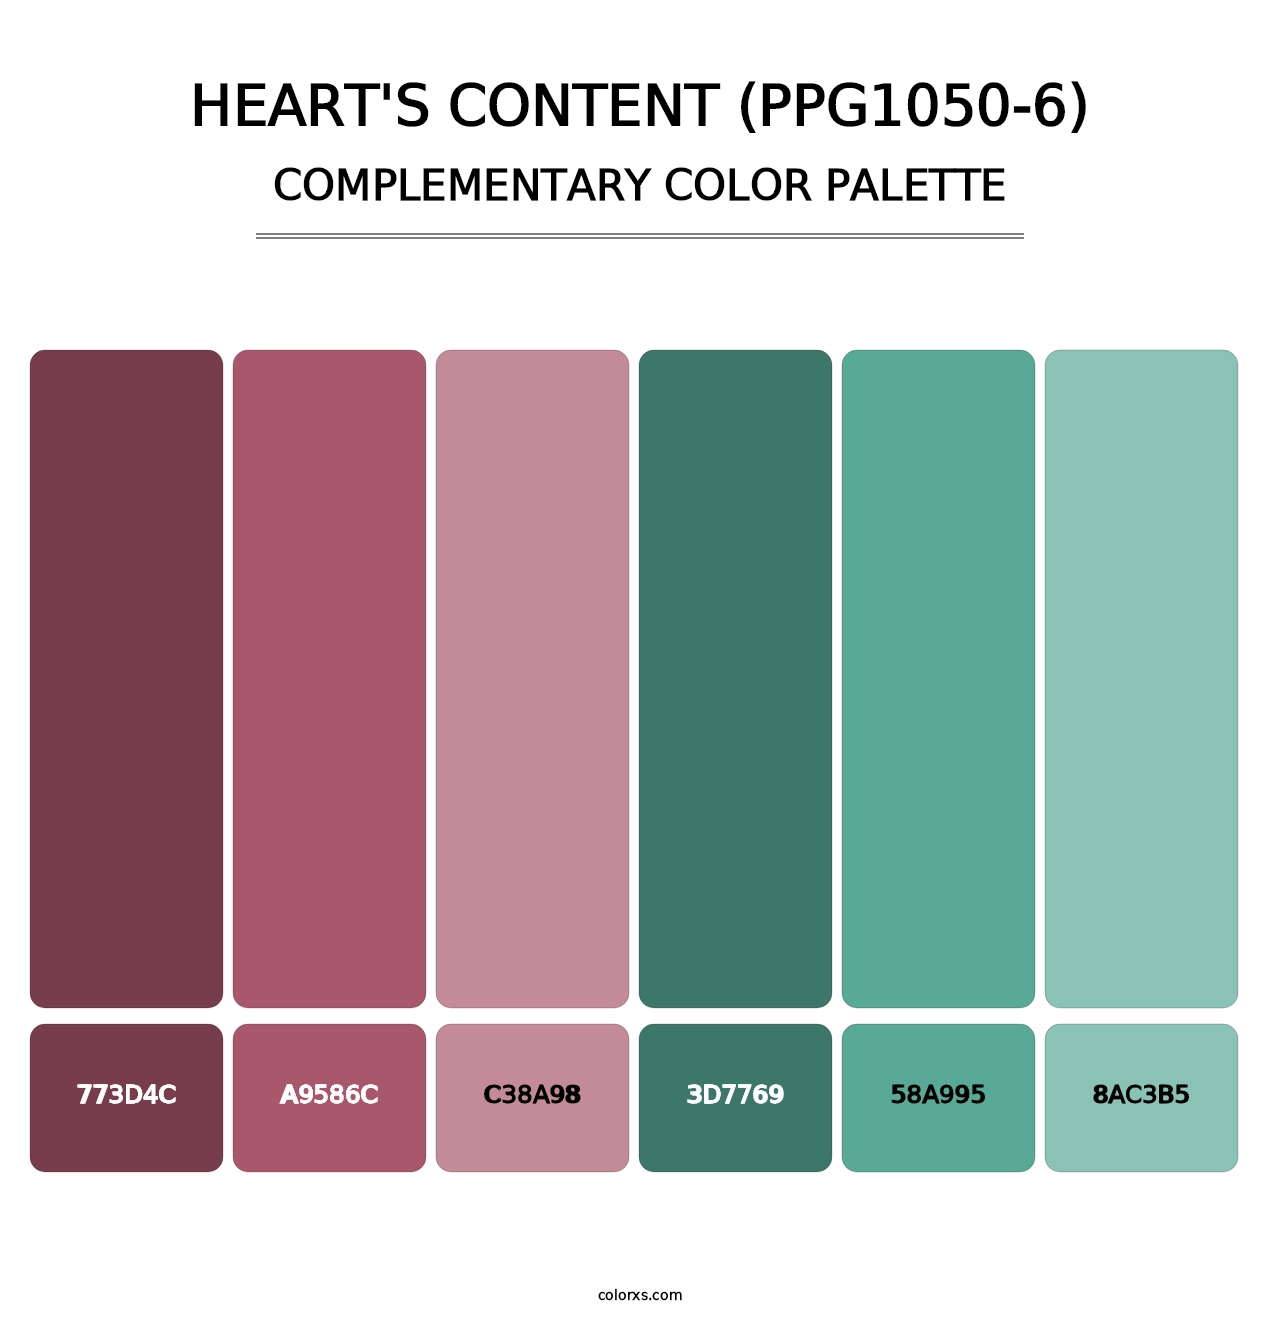 Heart's Content (PPG1050-6) - Complementary Color Palette